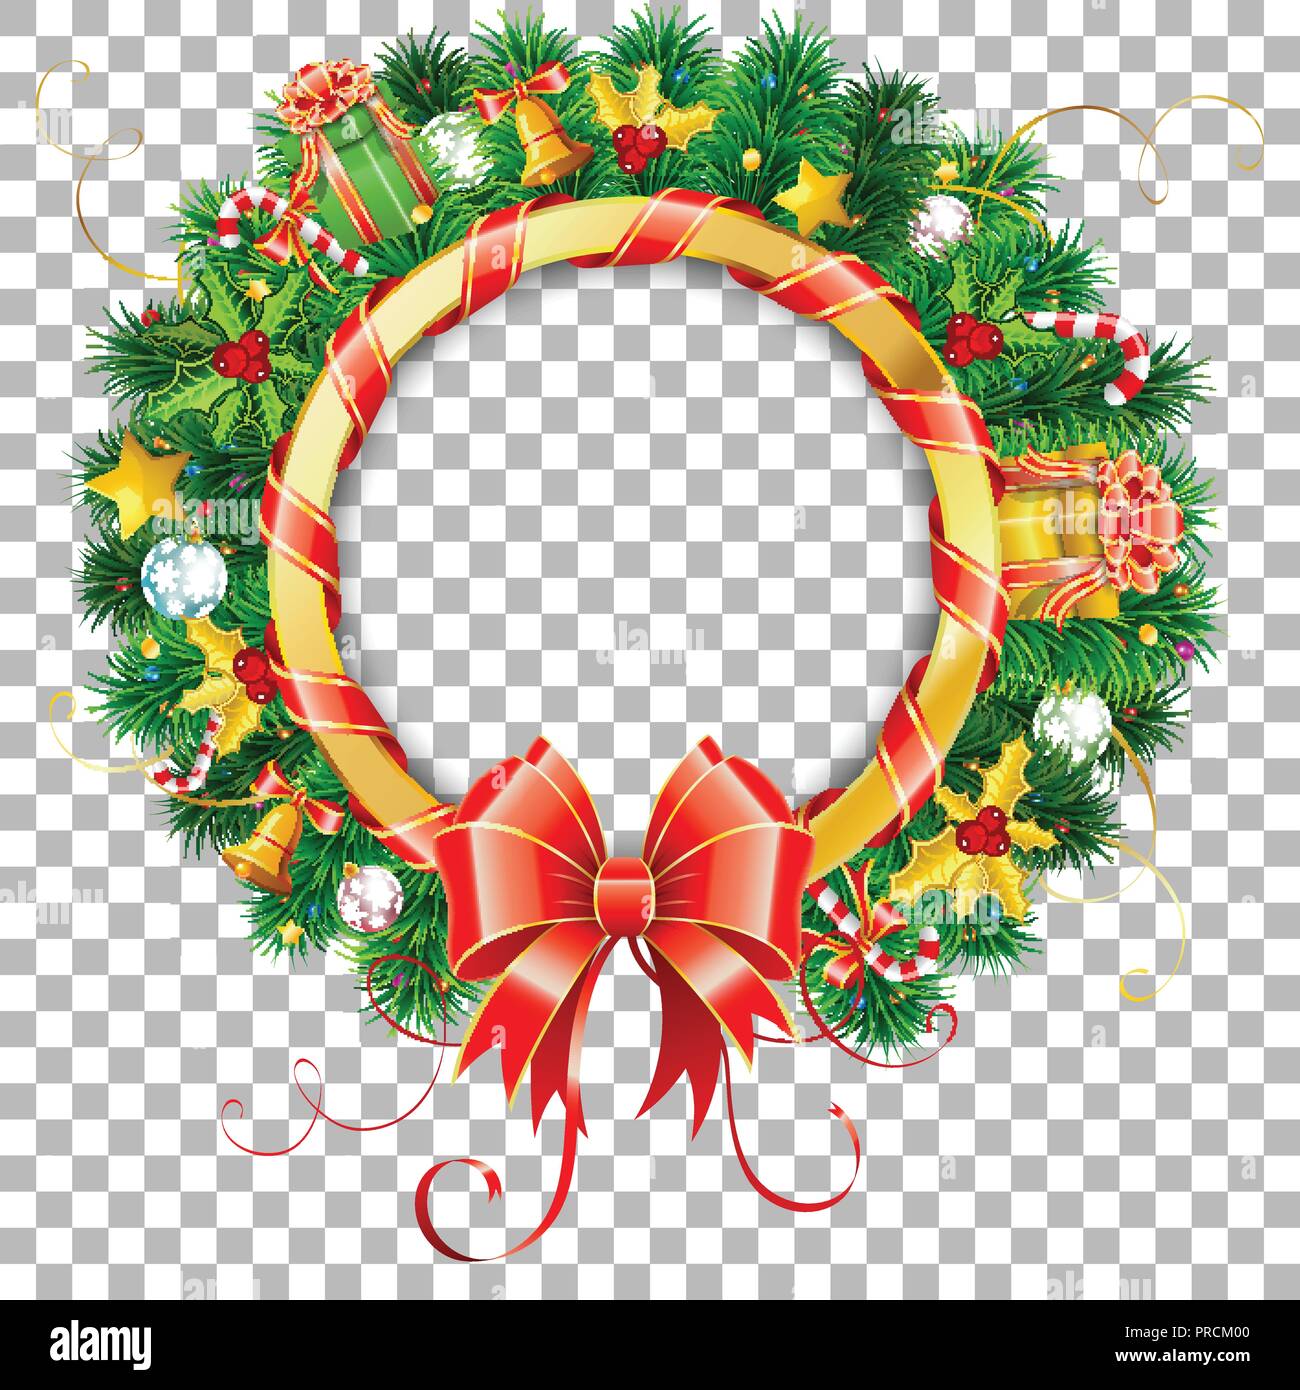 Christmas and New Year Wreath Stock Vector